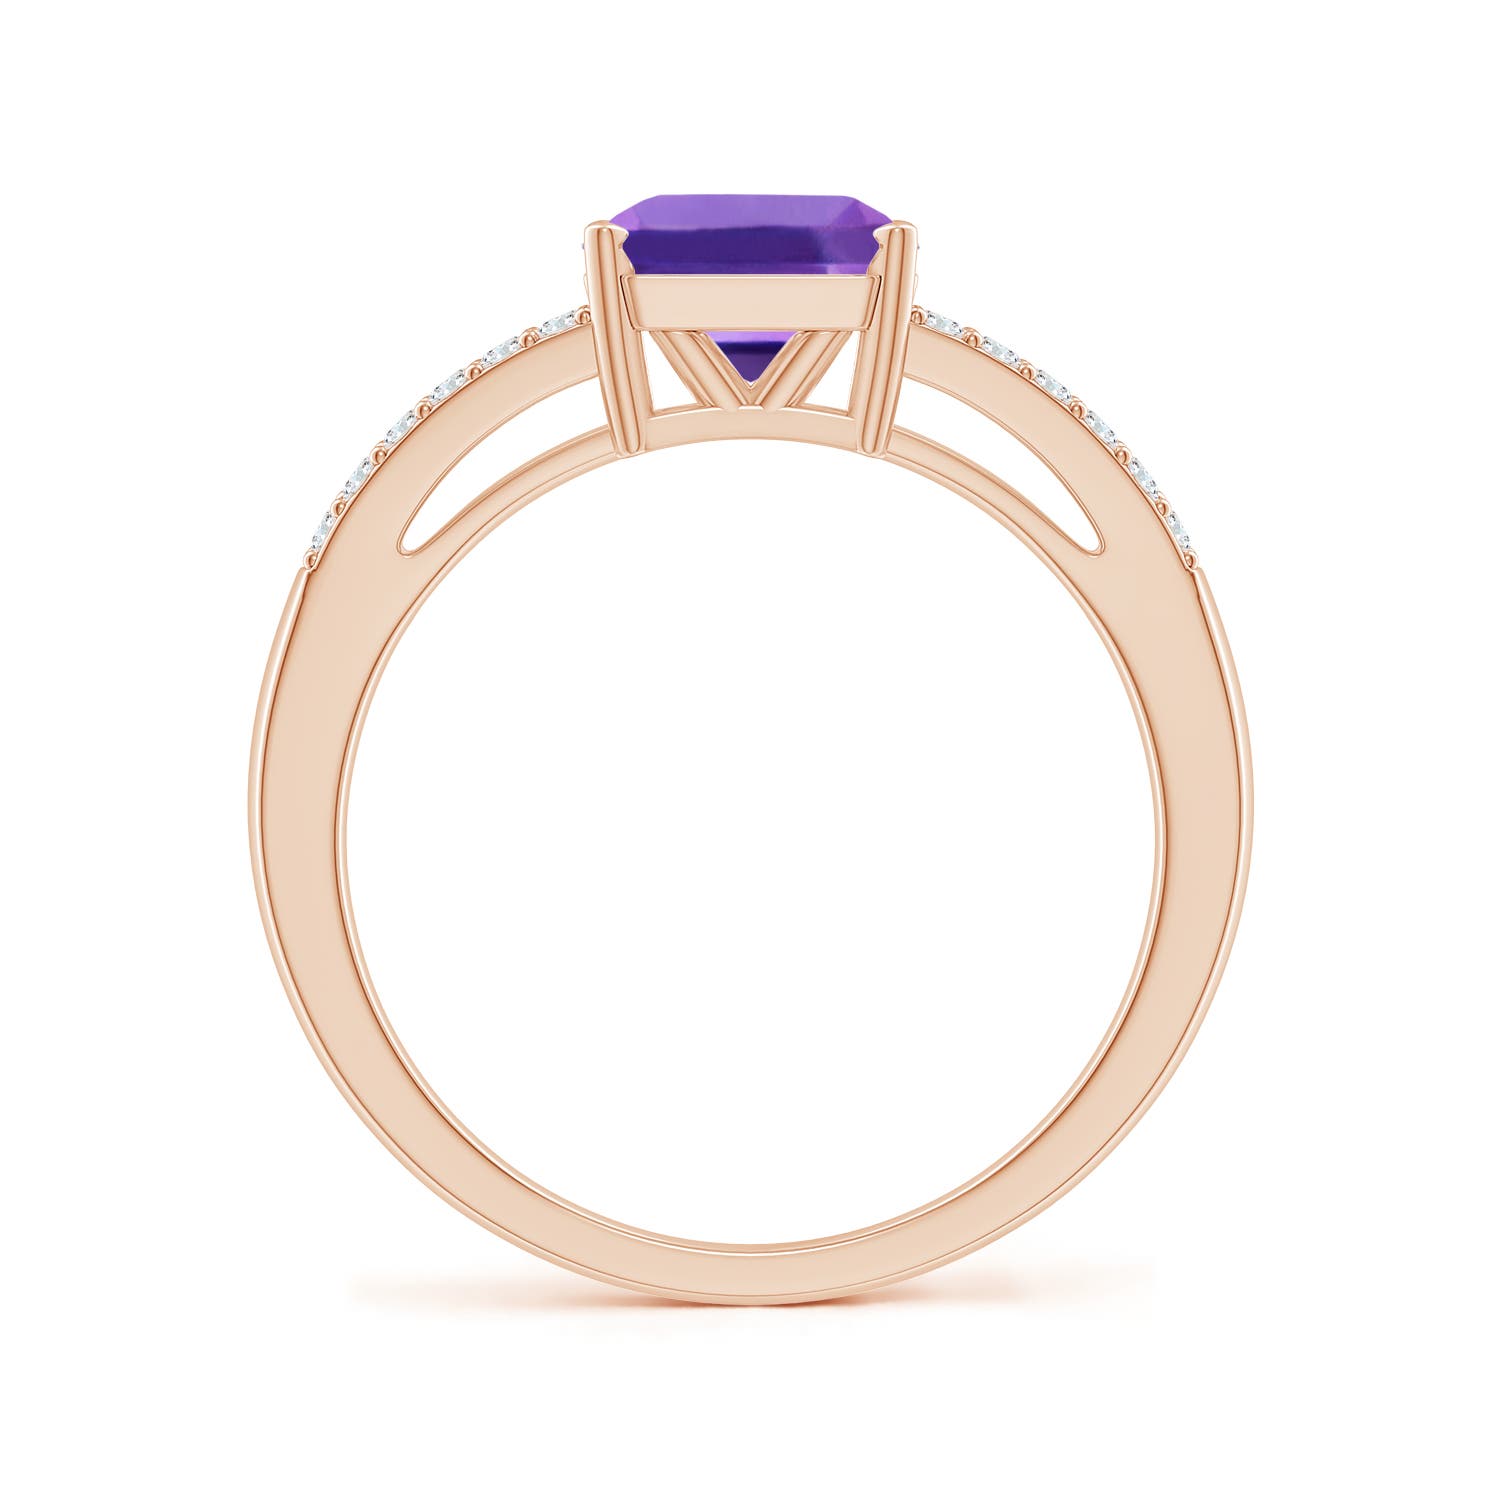 AAA - Amethyst / 1.54 CT / 14 KT Rose Gold